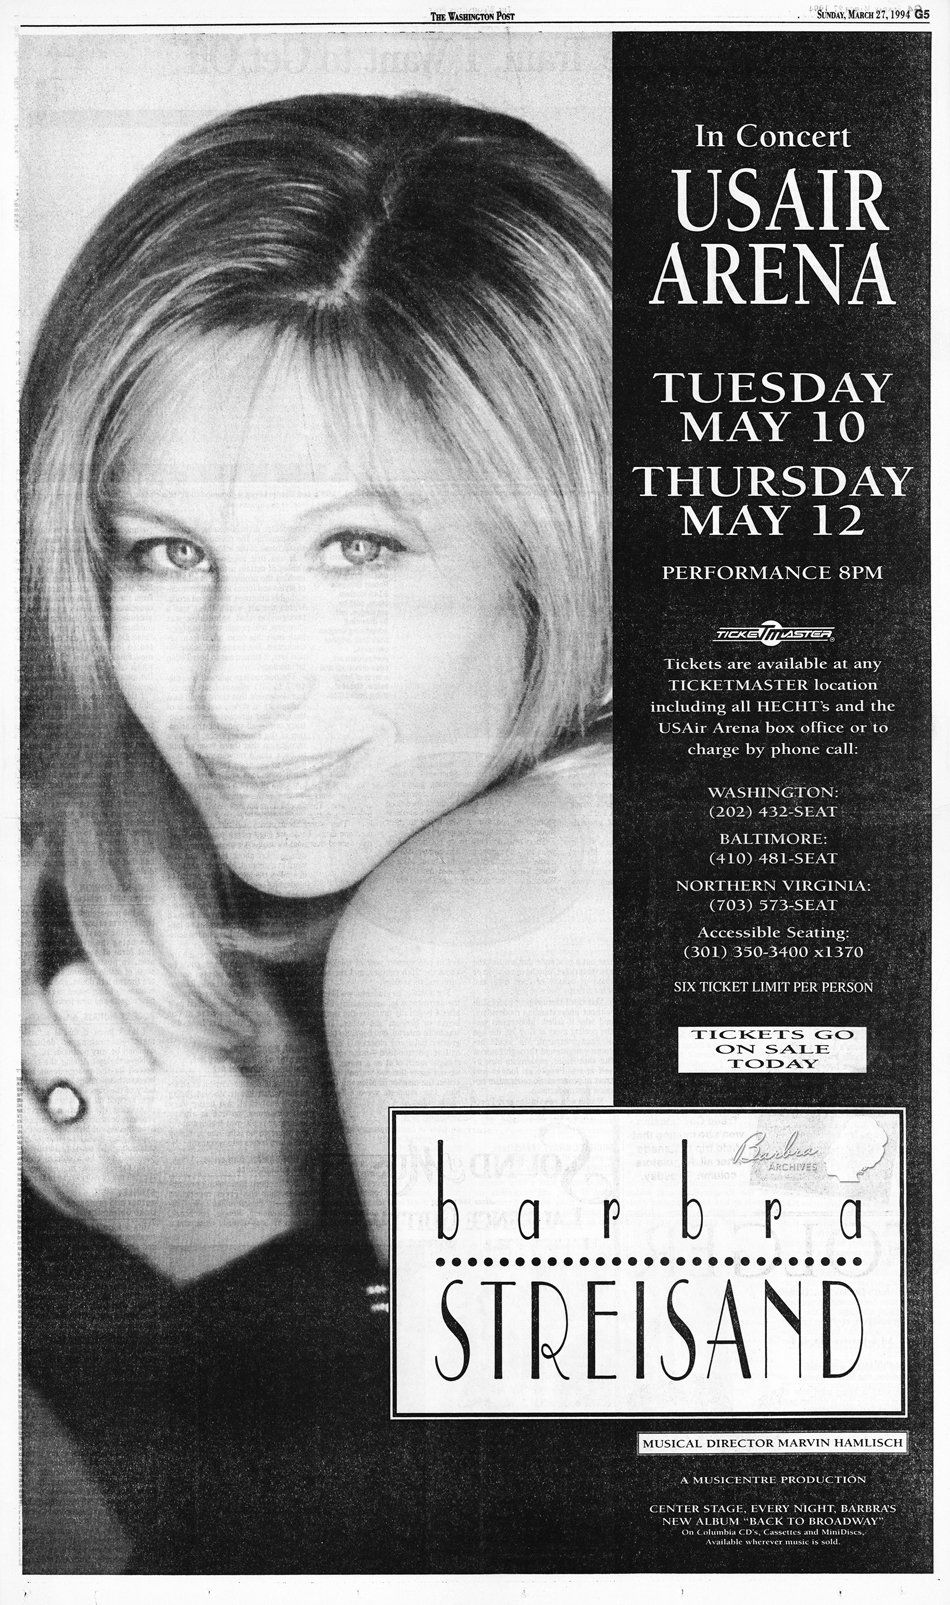 Washington Post newspaper ad for Streisand's May 1994 concerts in Landover, Maryland.